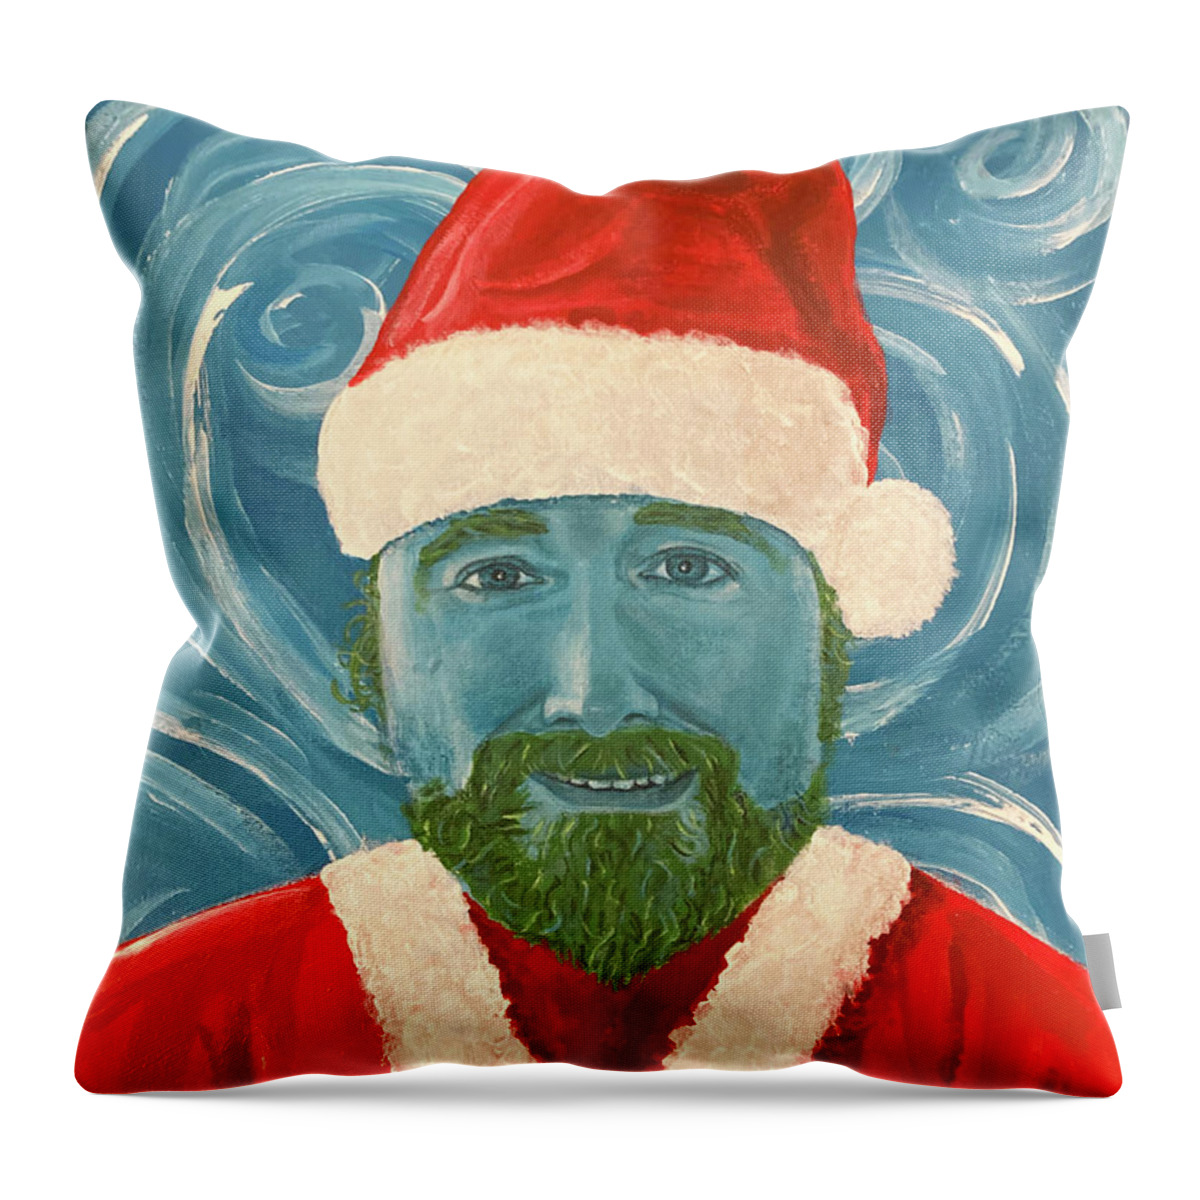  Throw Pillow featuring the painting Christmas Self-Portrait 2021 by Michael Morgan